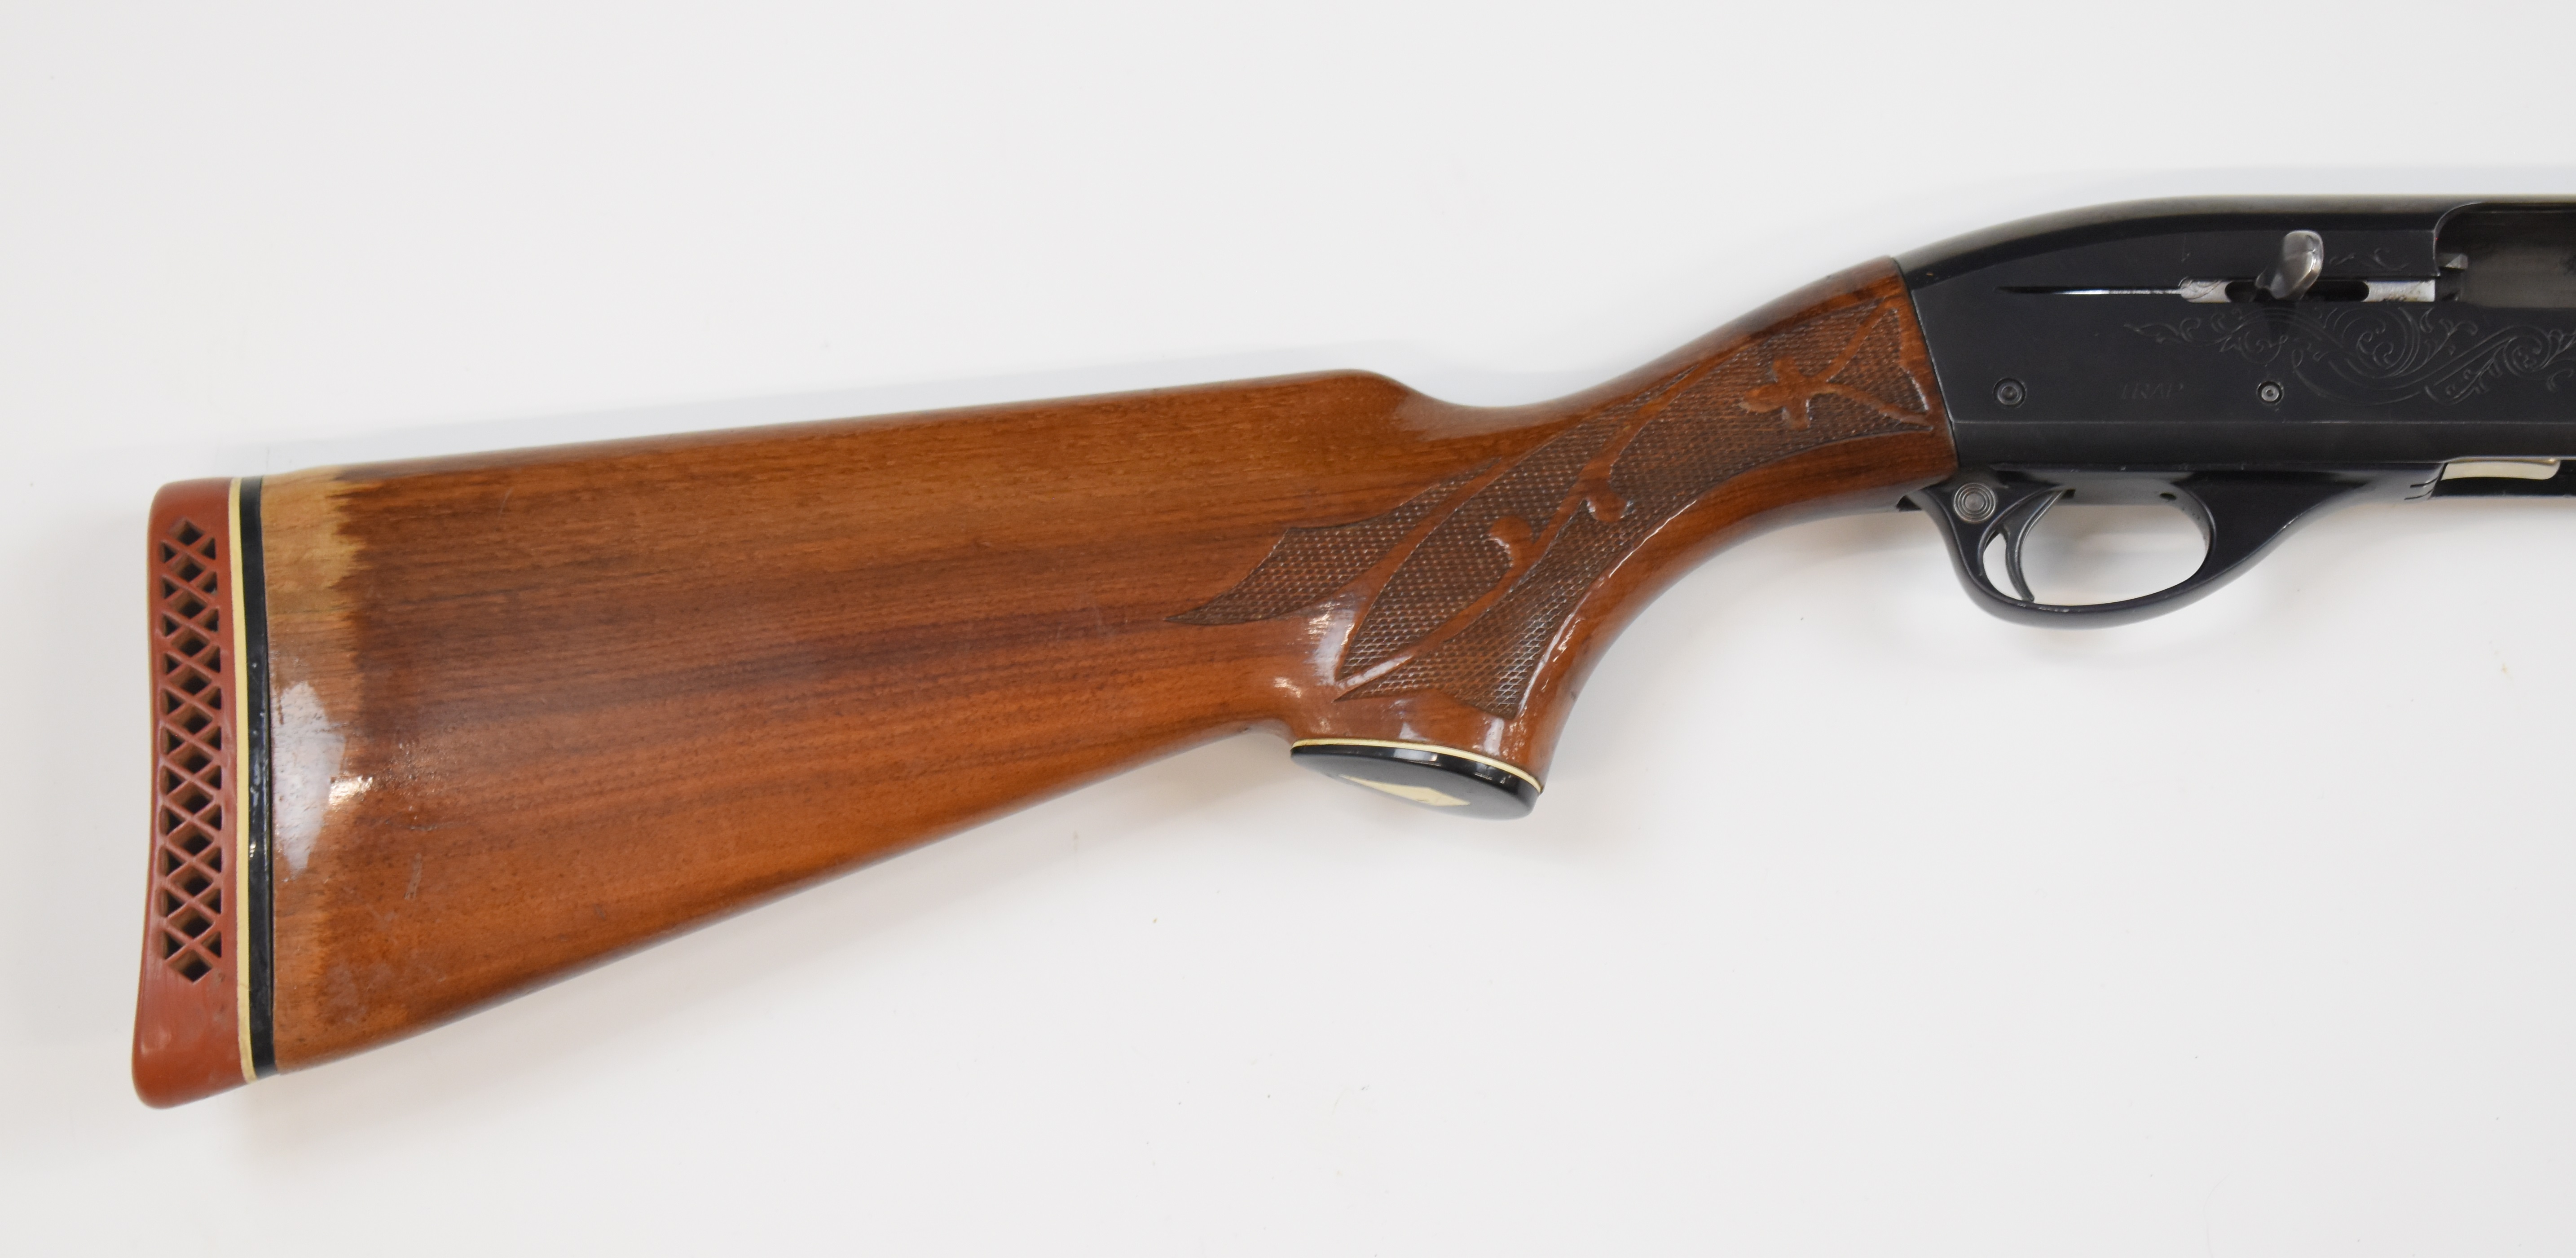 Remington Model 1100 Trap 12 bore 3-shot semi-automatic shotgun with ornately carved and chequered - Image 3 of 11